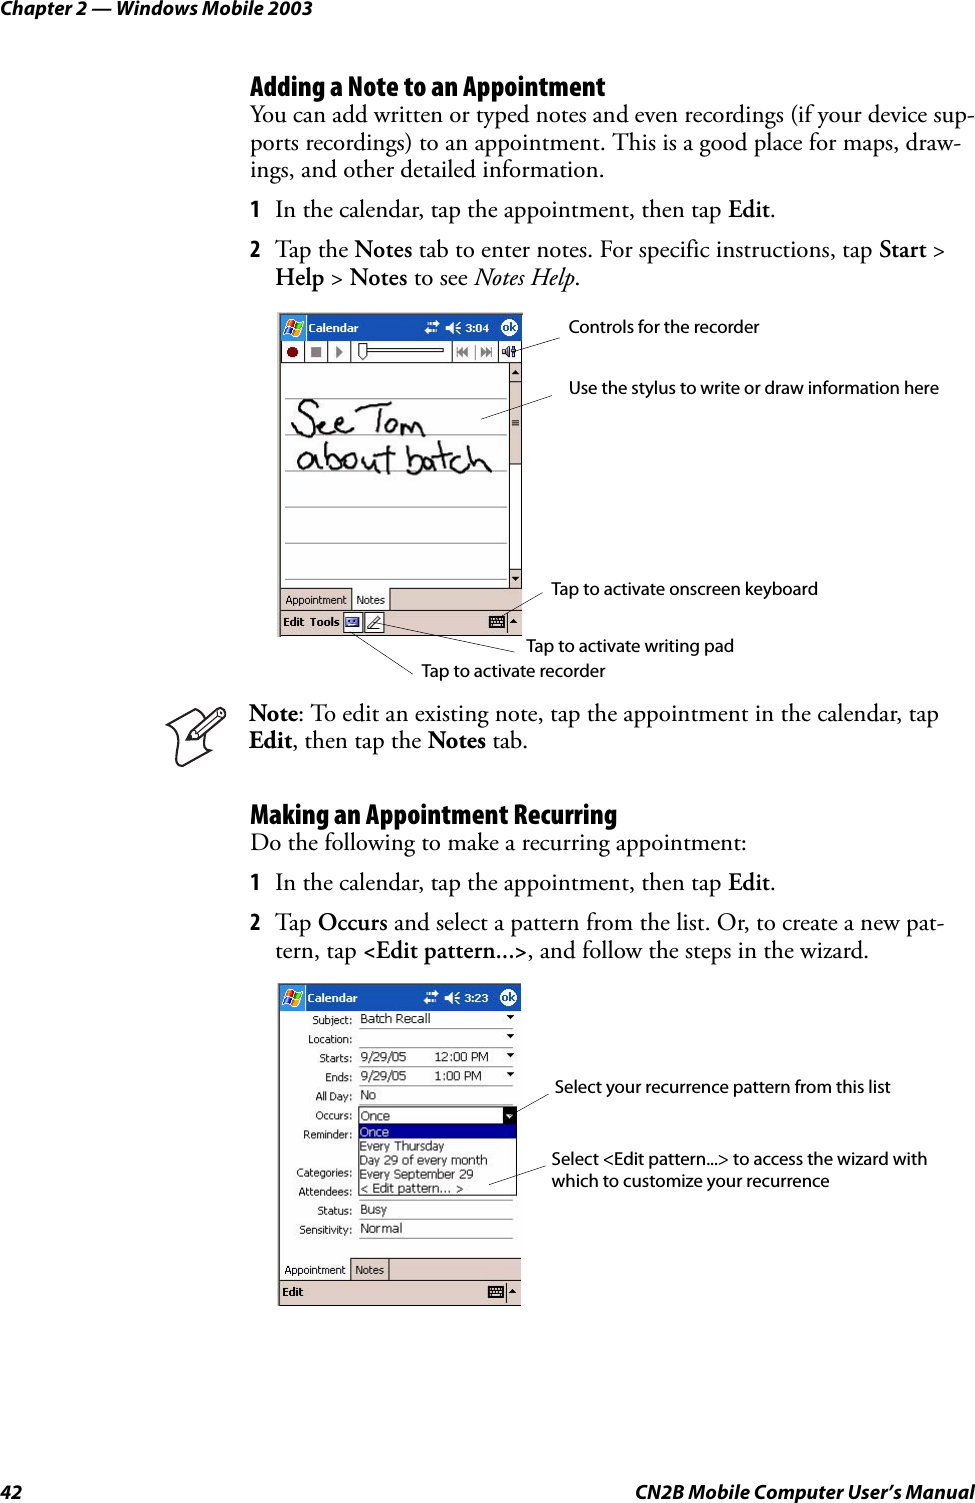 Chapter 2 — Windows Mobile 200342 CN2B Mobile Computer User’s ManualAdding a Note to an AppointmentYou can add written or typed notes and even recordings (if your device sup-ports recordings) to an appointment. This is a good place for maps, draw-ings, and other detailed information.1In the calendar, tap the appointment, then tap Edit.2Tap the Notes tab to enter notes. For specific instructions, tap Start &gt; Help &gt; Notes to see Notes Help.Making an Appointment RecurringDo the following to make a recurring appointment:1In the calendar, tap the appointment, then tap Edit.2Tap Occurs and select a pattern from the list. Or, to create a new pat-tern, tap &lt;Edit pattern...&gt;, and follow the steps in the wizard.Note: To edit an existing note, tap the appointment in the calendar, tap Edit, then tap the Notes tab.Controls for the recorderUse the stylus to write or draw information hereTap to activate recorderTap to activate writing padTap to activate onscreen keyboardSelect your recurrence pattern from this listSelect &lt;Edit pattern...&gt; to access the wizard withwhich to customize your recurrence